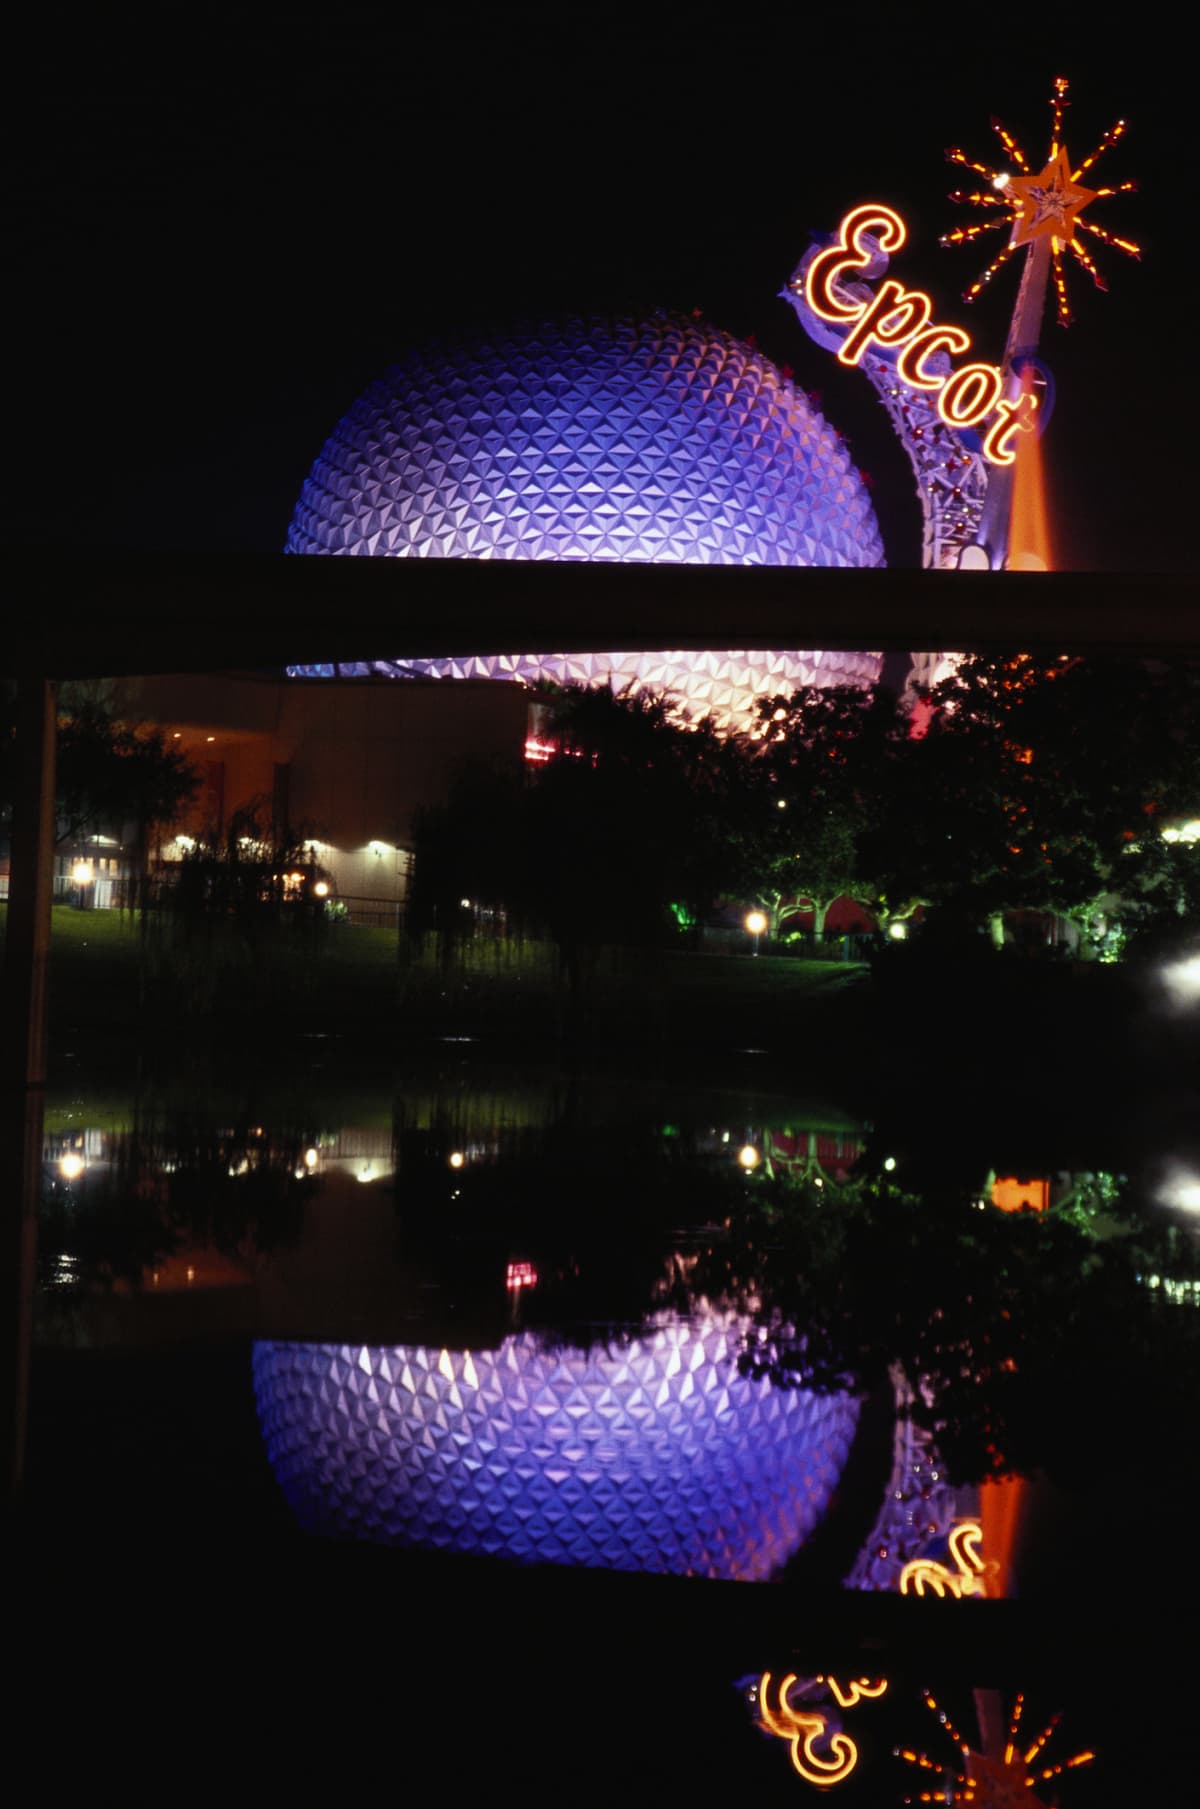 The geosphere Spaceship Earth at Epcot Center in Disney World is lit up at night.